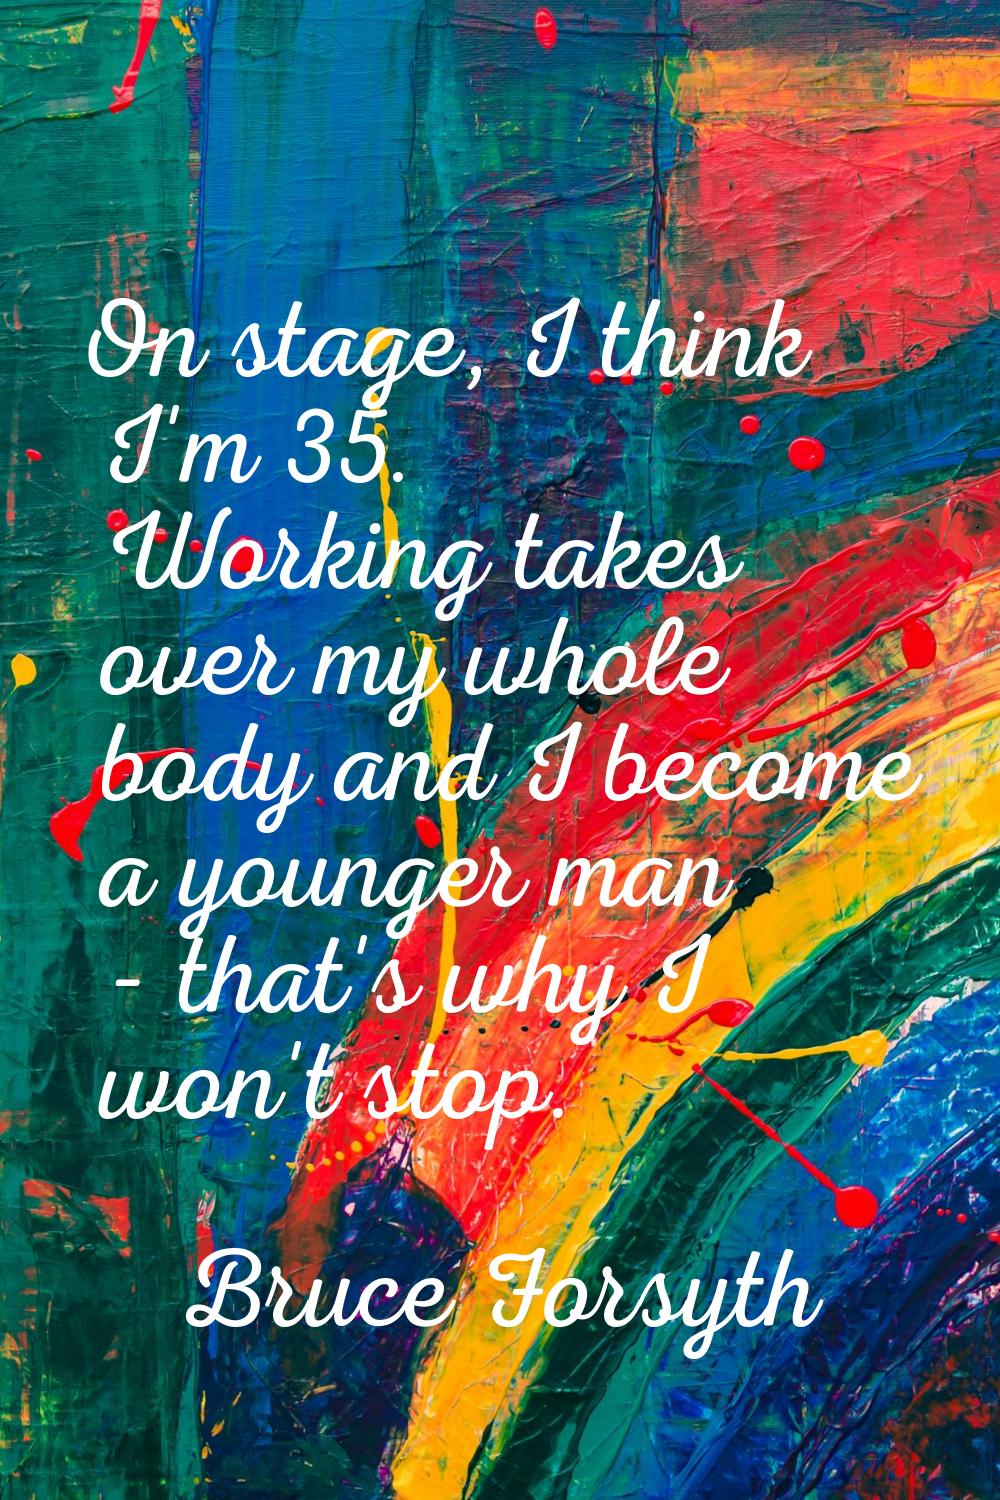 On stage, I think I'm 35. Working takes over my whole body and I become a younger man - that's why 